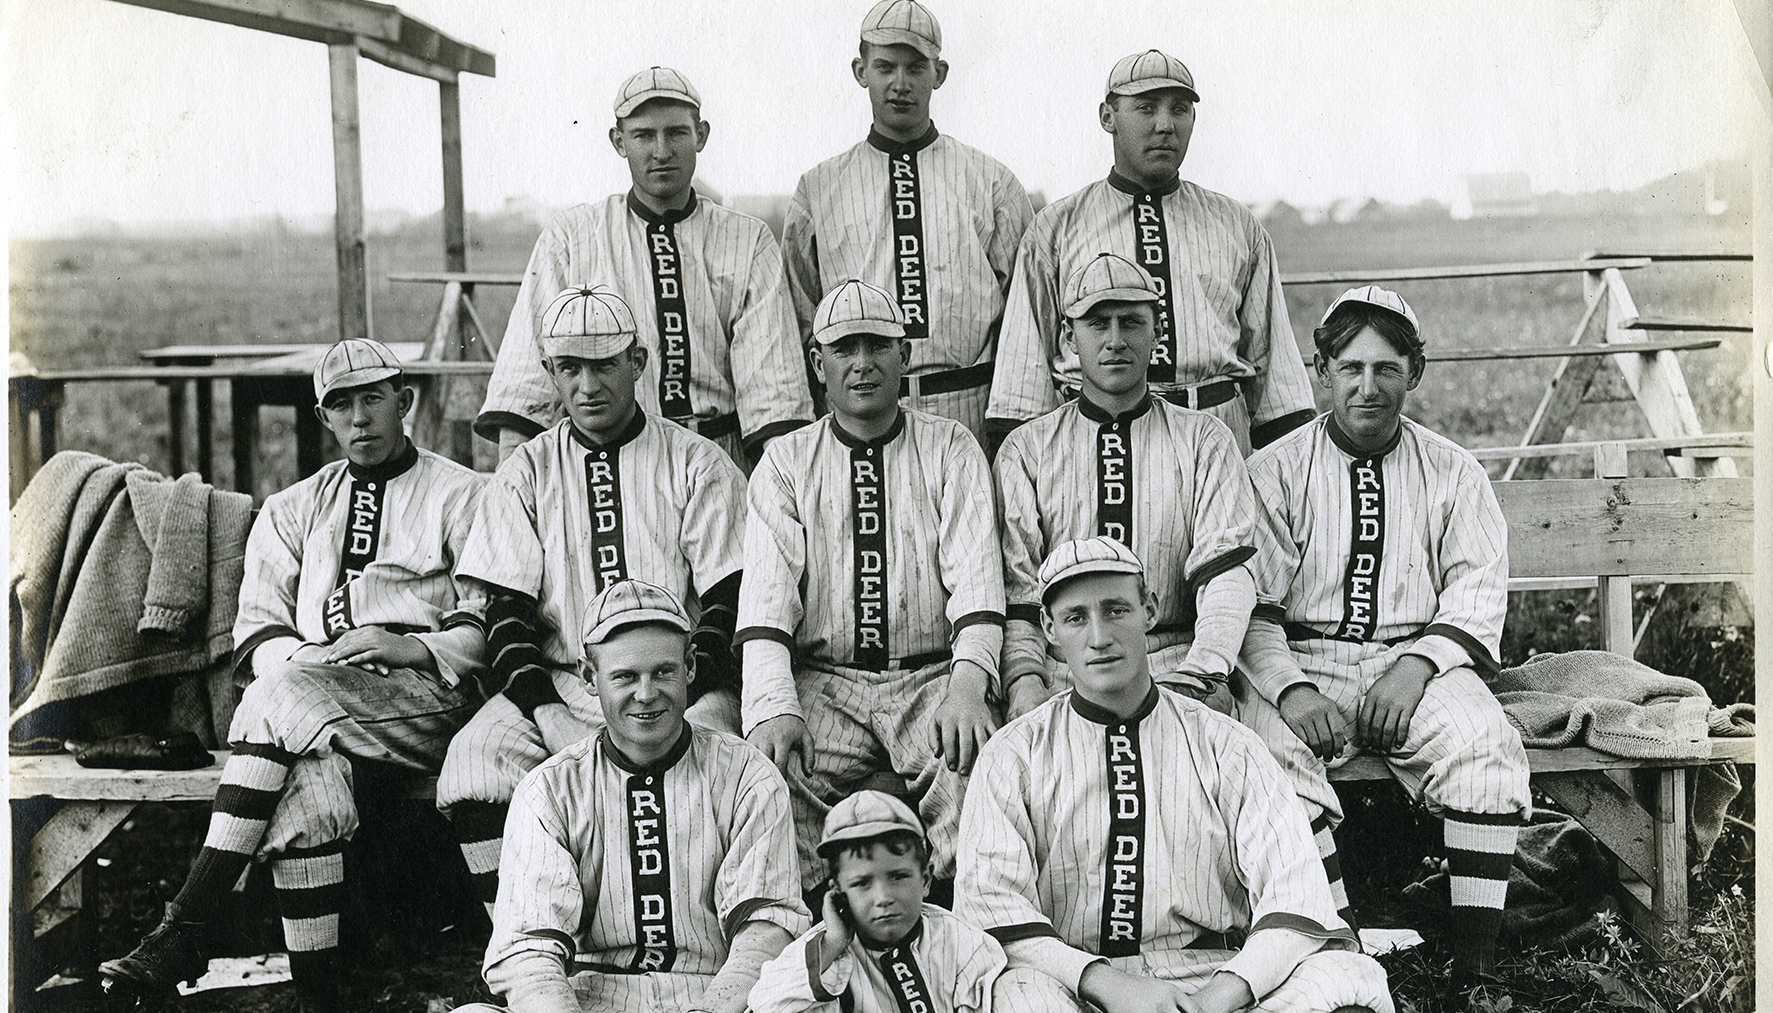 Black and white photo of a baseball team posing for the camera in three rows